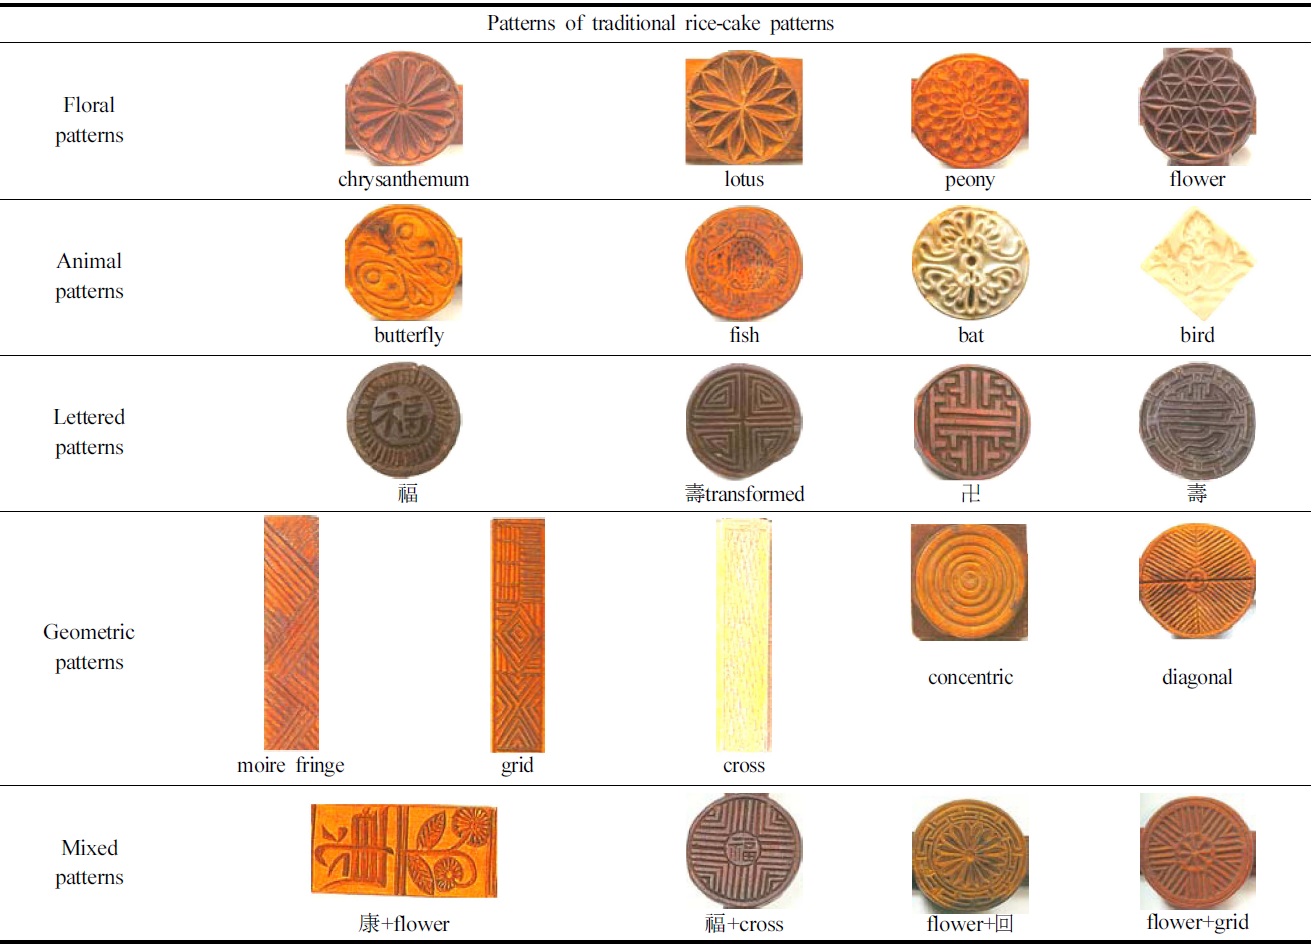 Patterns of traditional rice-cake patterns